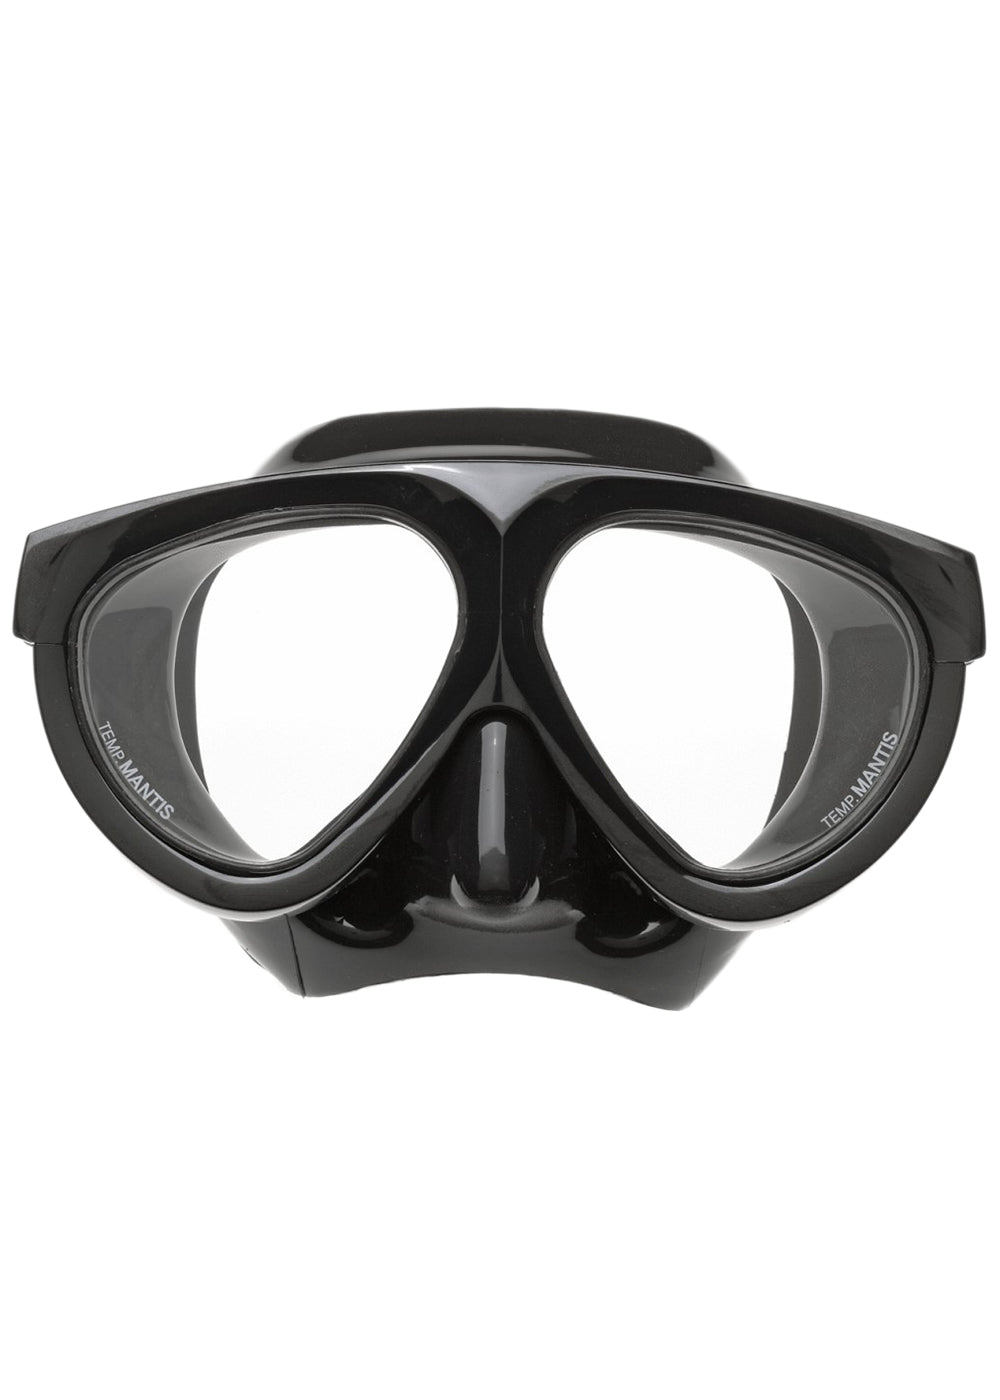 Riffe Mantis Mask - Adreno - Ocean Outfitters